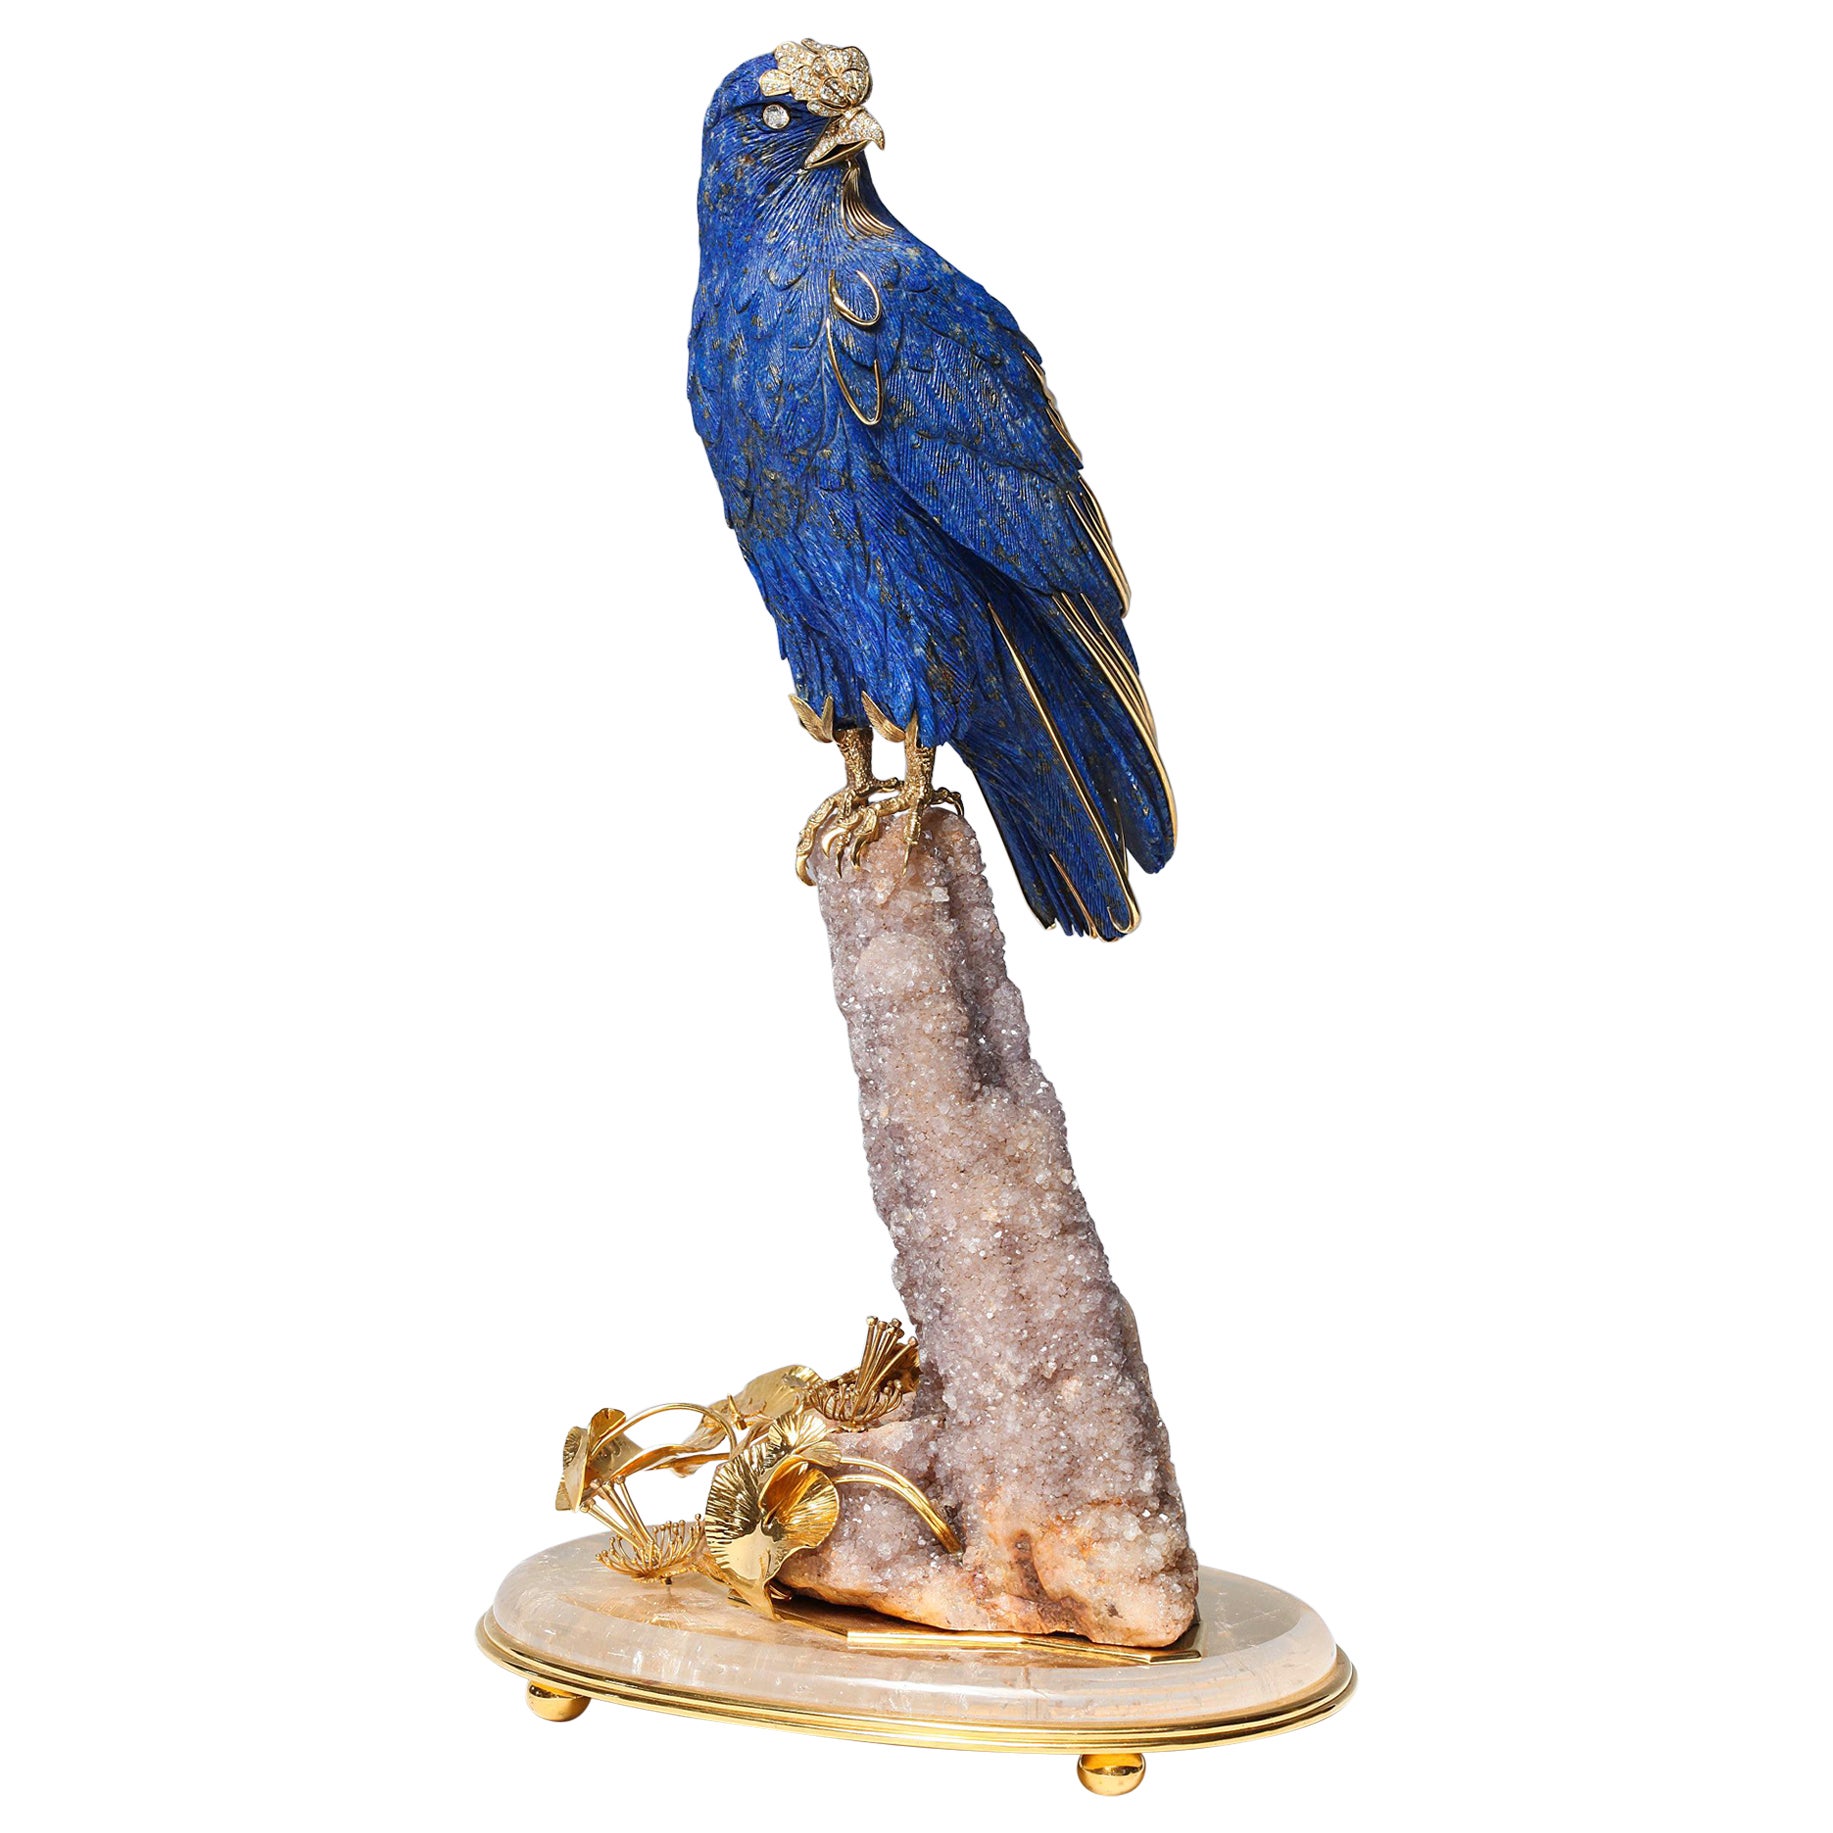 An Important Jeweled, Gold, Lapis Lazuli Falcon by Asprey & Co. London, Signed